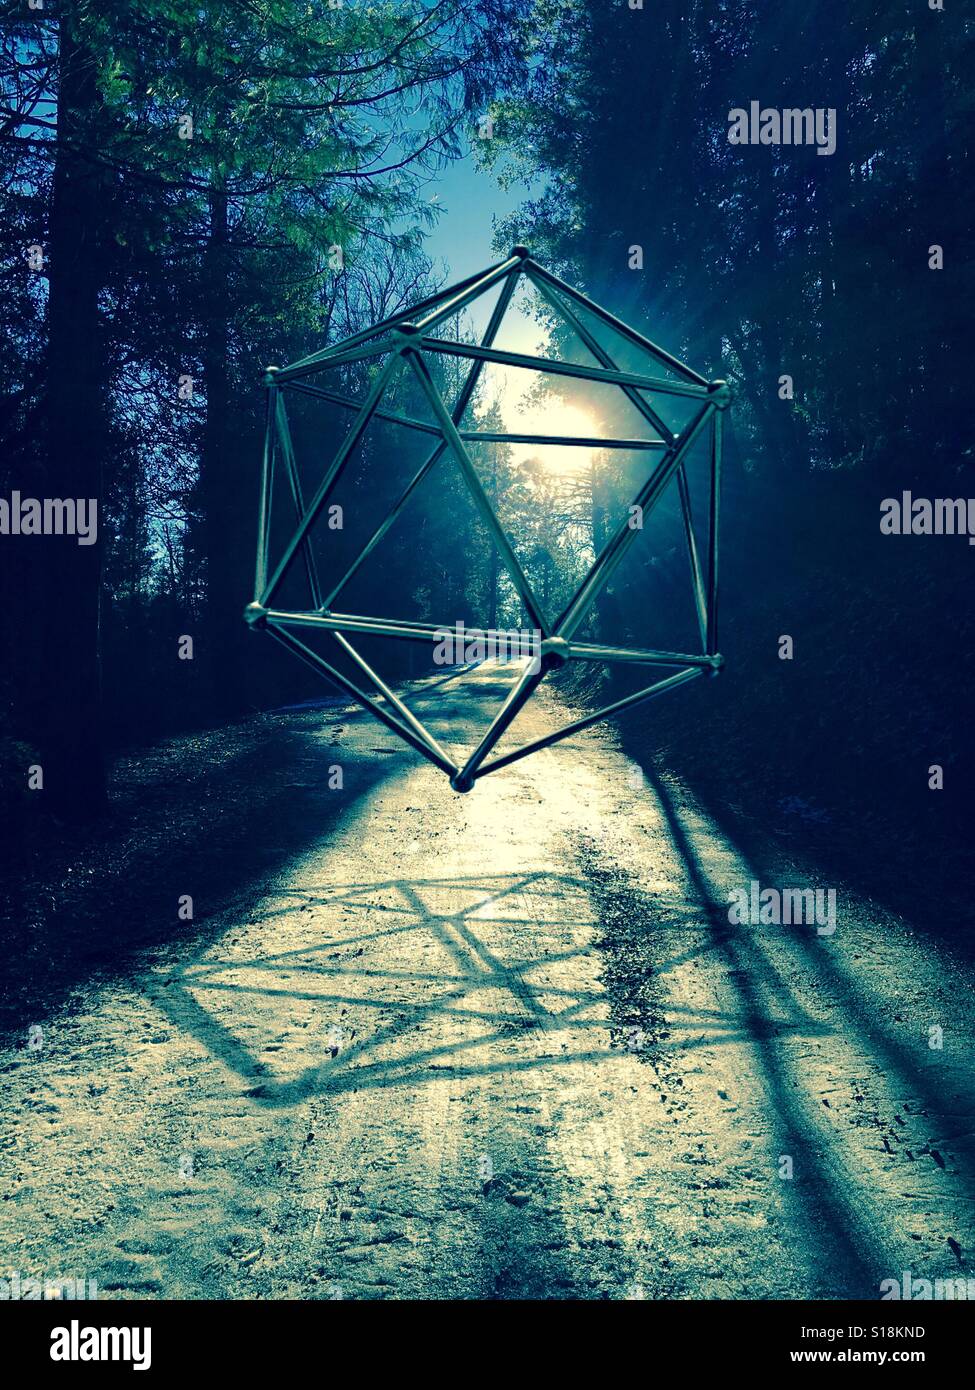 Geometric shape hovers on forest path Stock Photo